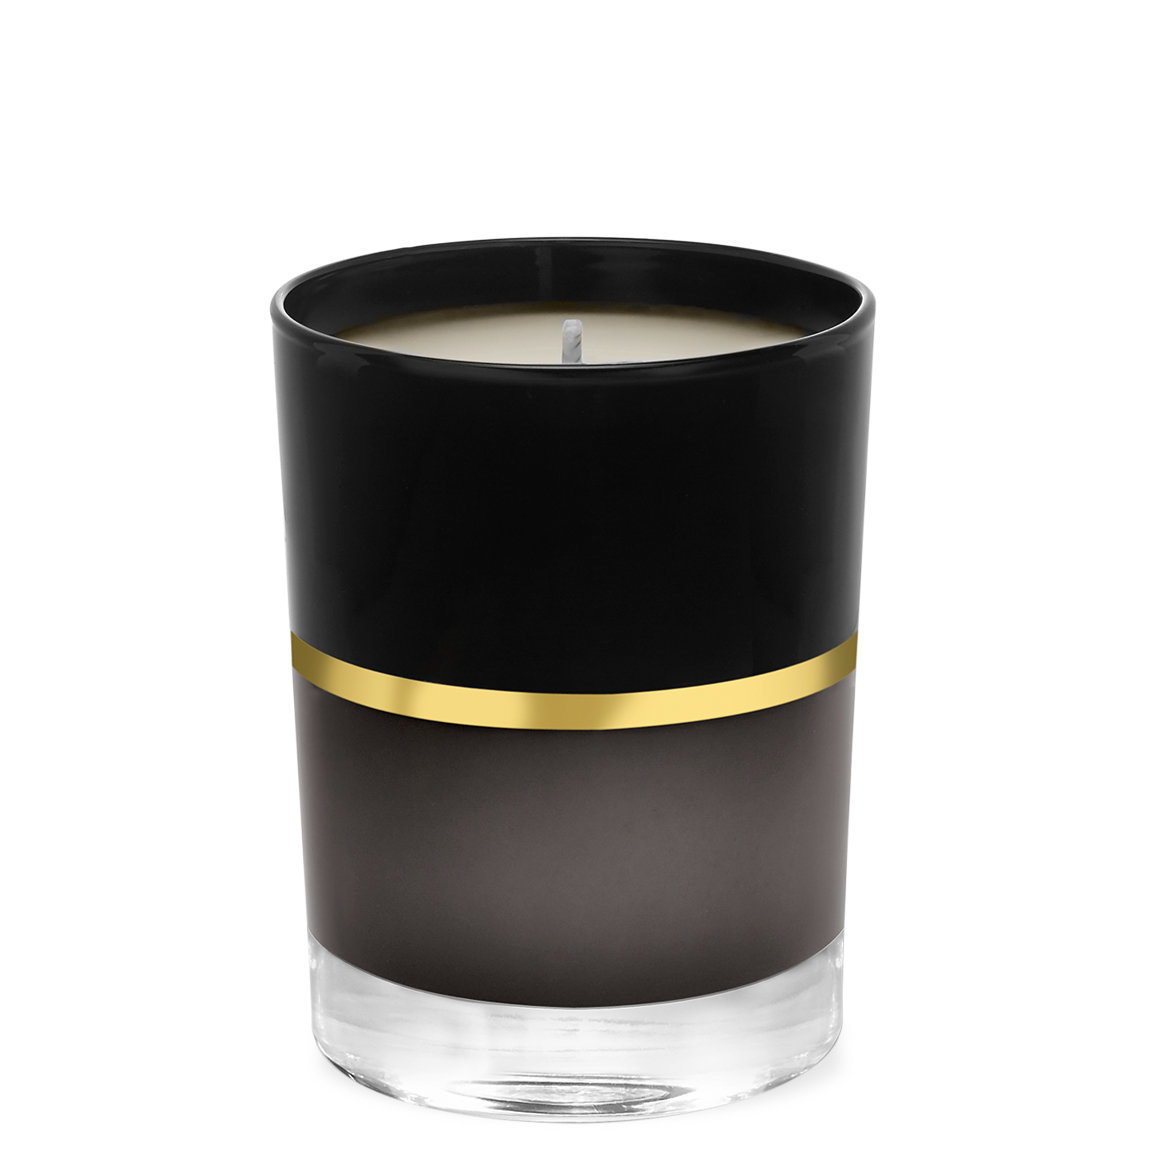 Oribe Côte d’Azur Scented Candle alternative view 1 - product swatch.